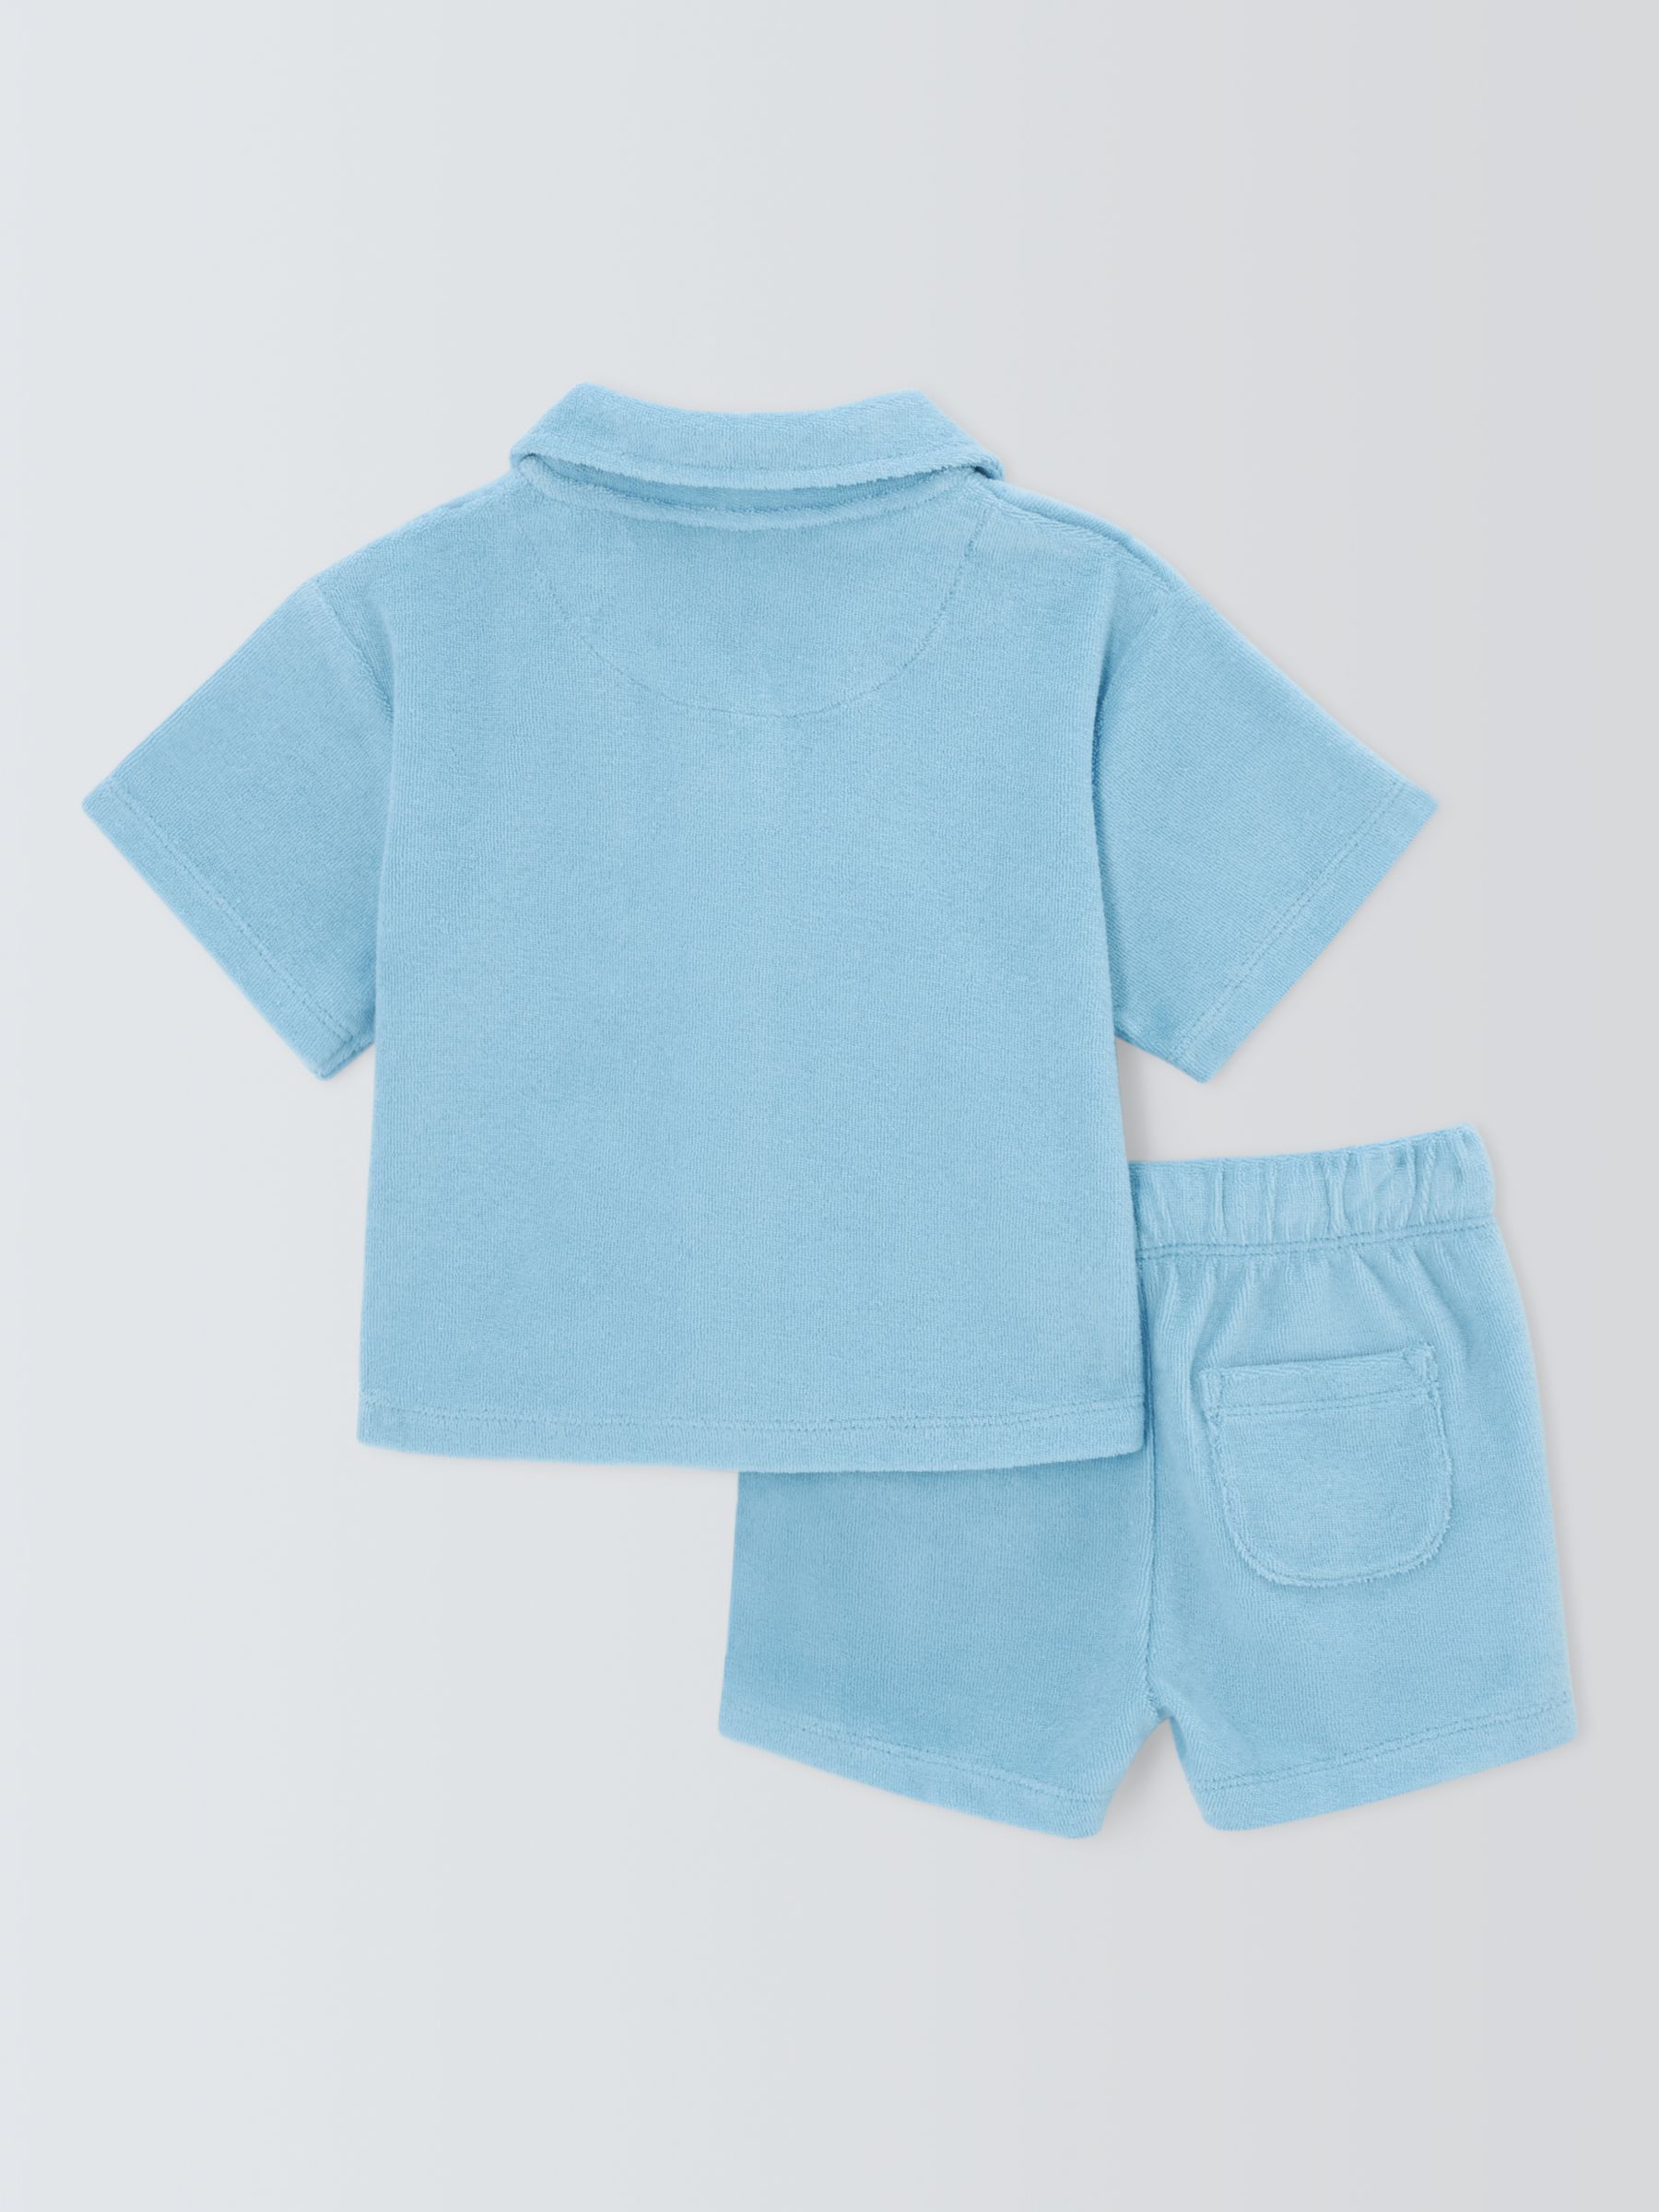 John Lewis ANYDAY Baby Towelling Shirt and Shorts Set, Multi, 6-9 months